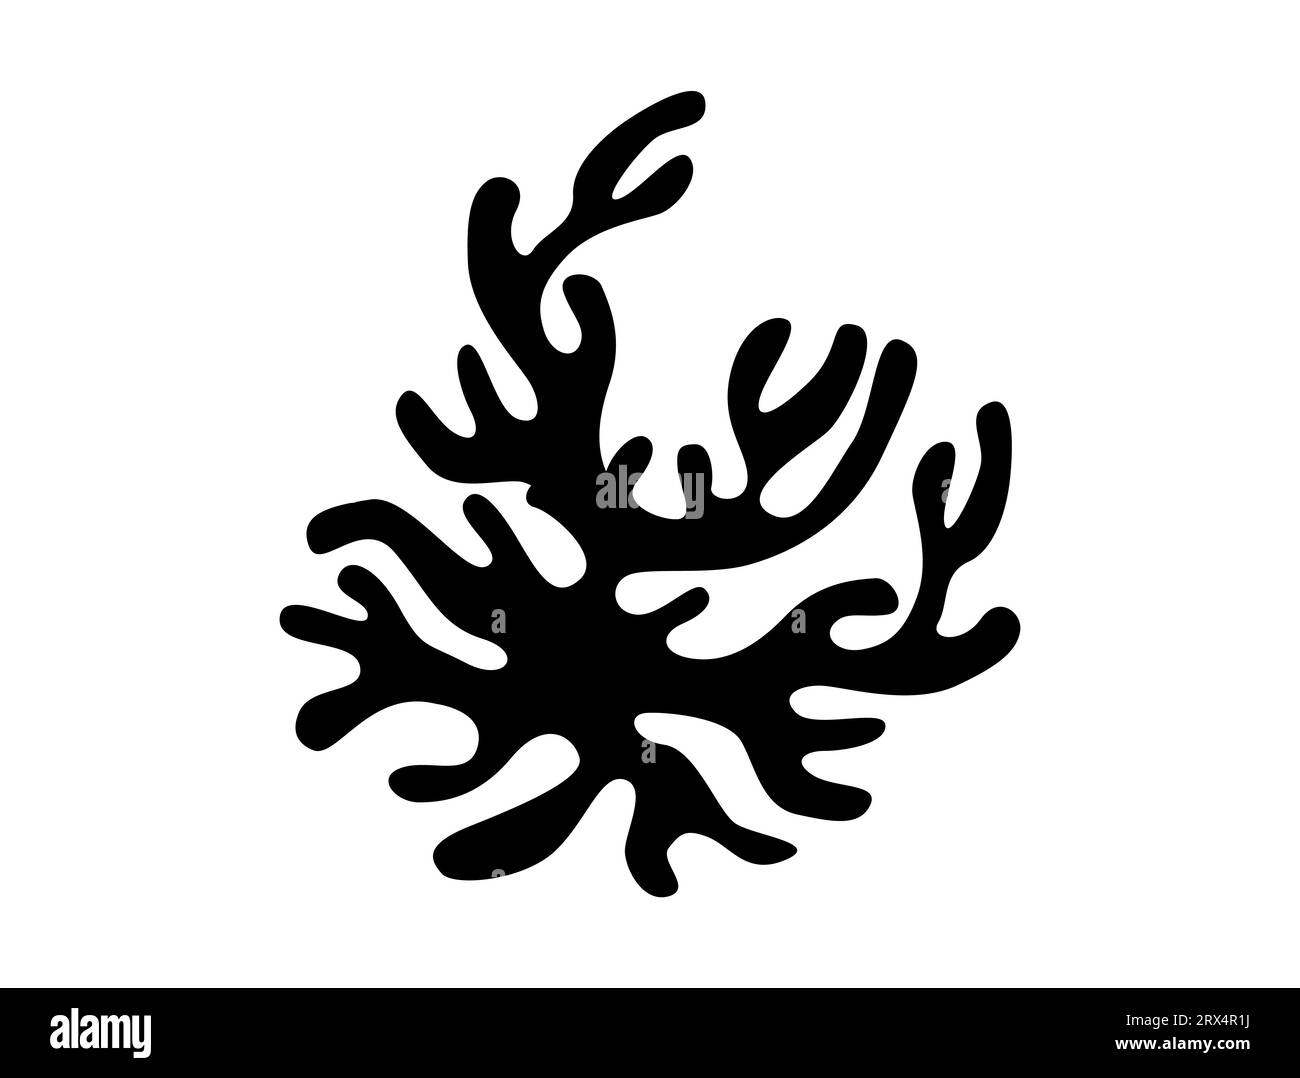 Coral silhouette vector art white background Stock Vector